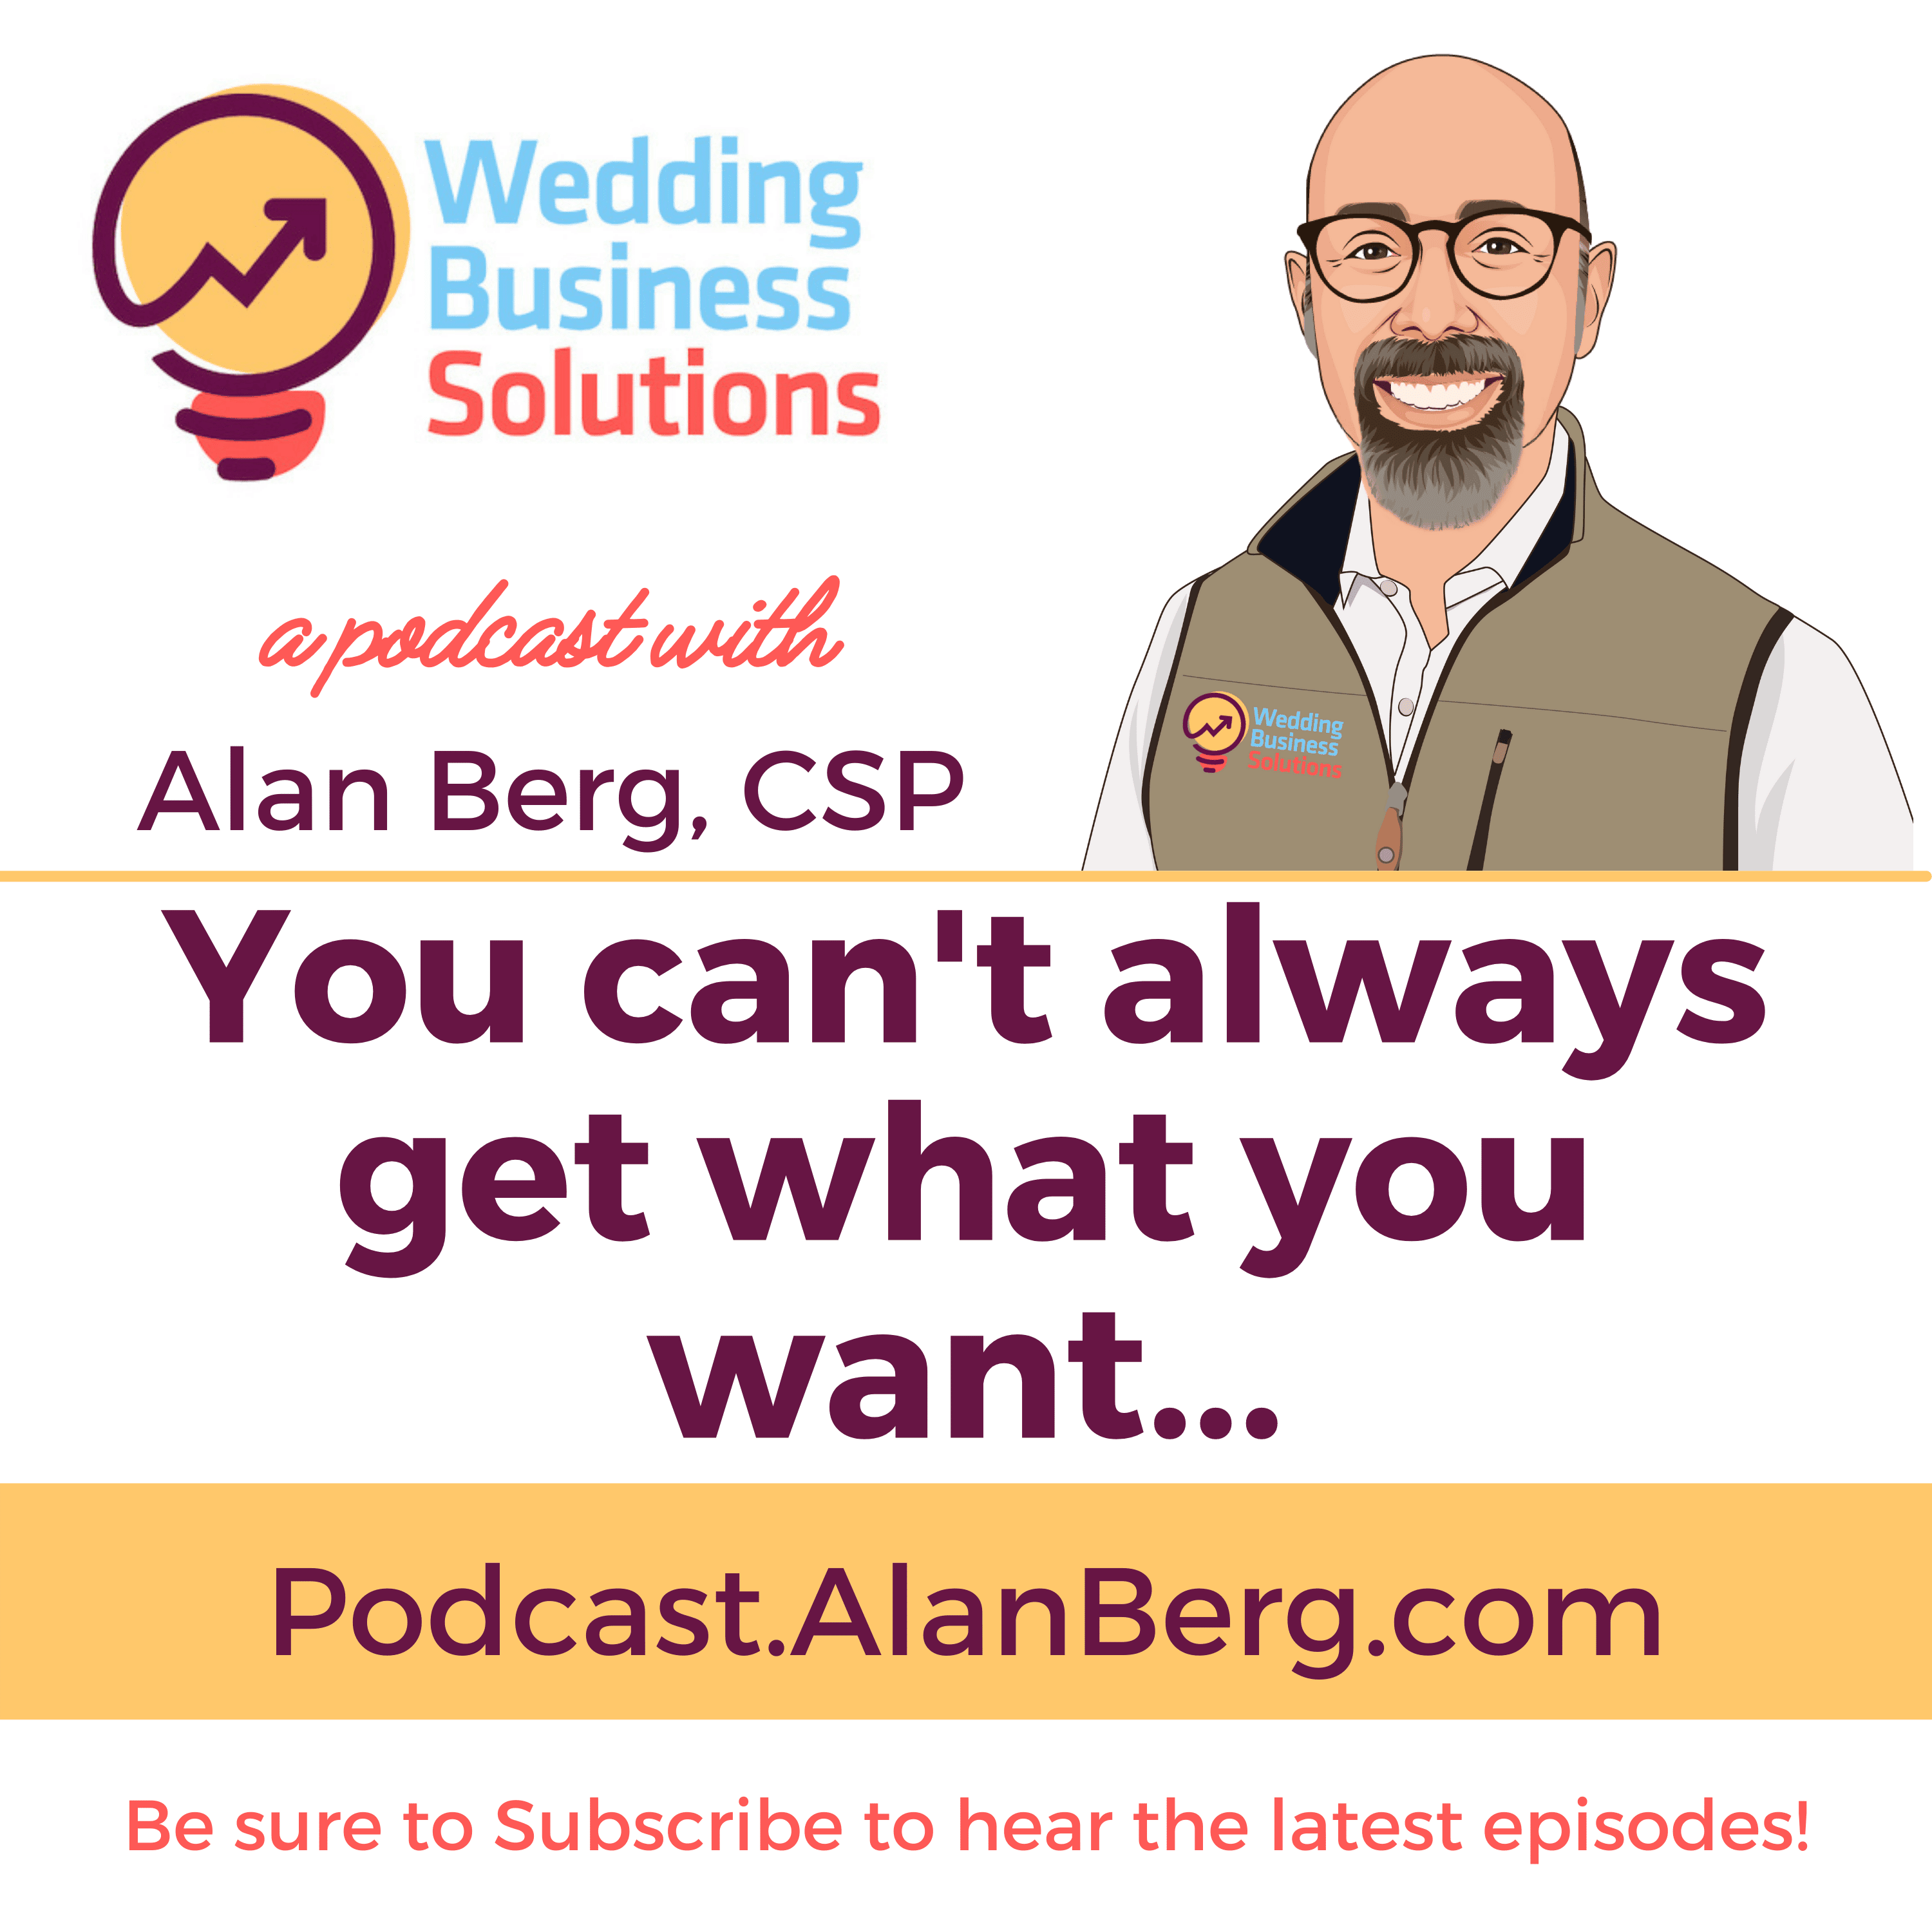 You can't always get what you want - Alan Berg CSP, Wedding Business Solutions